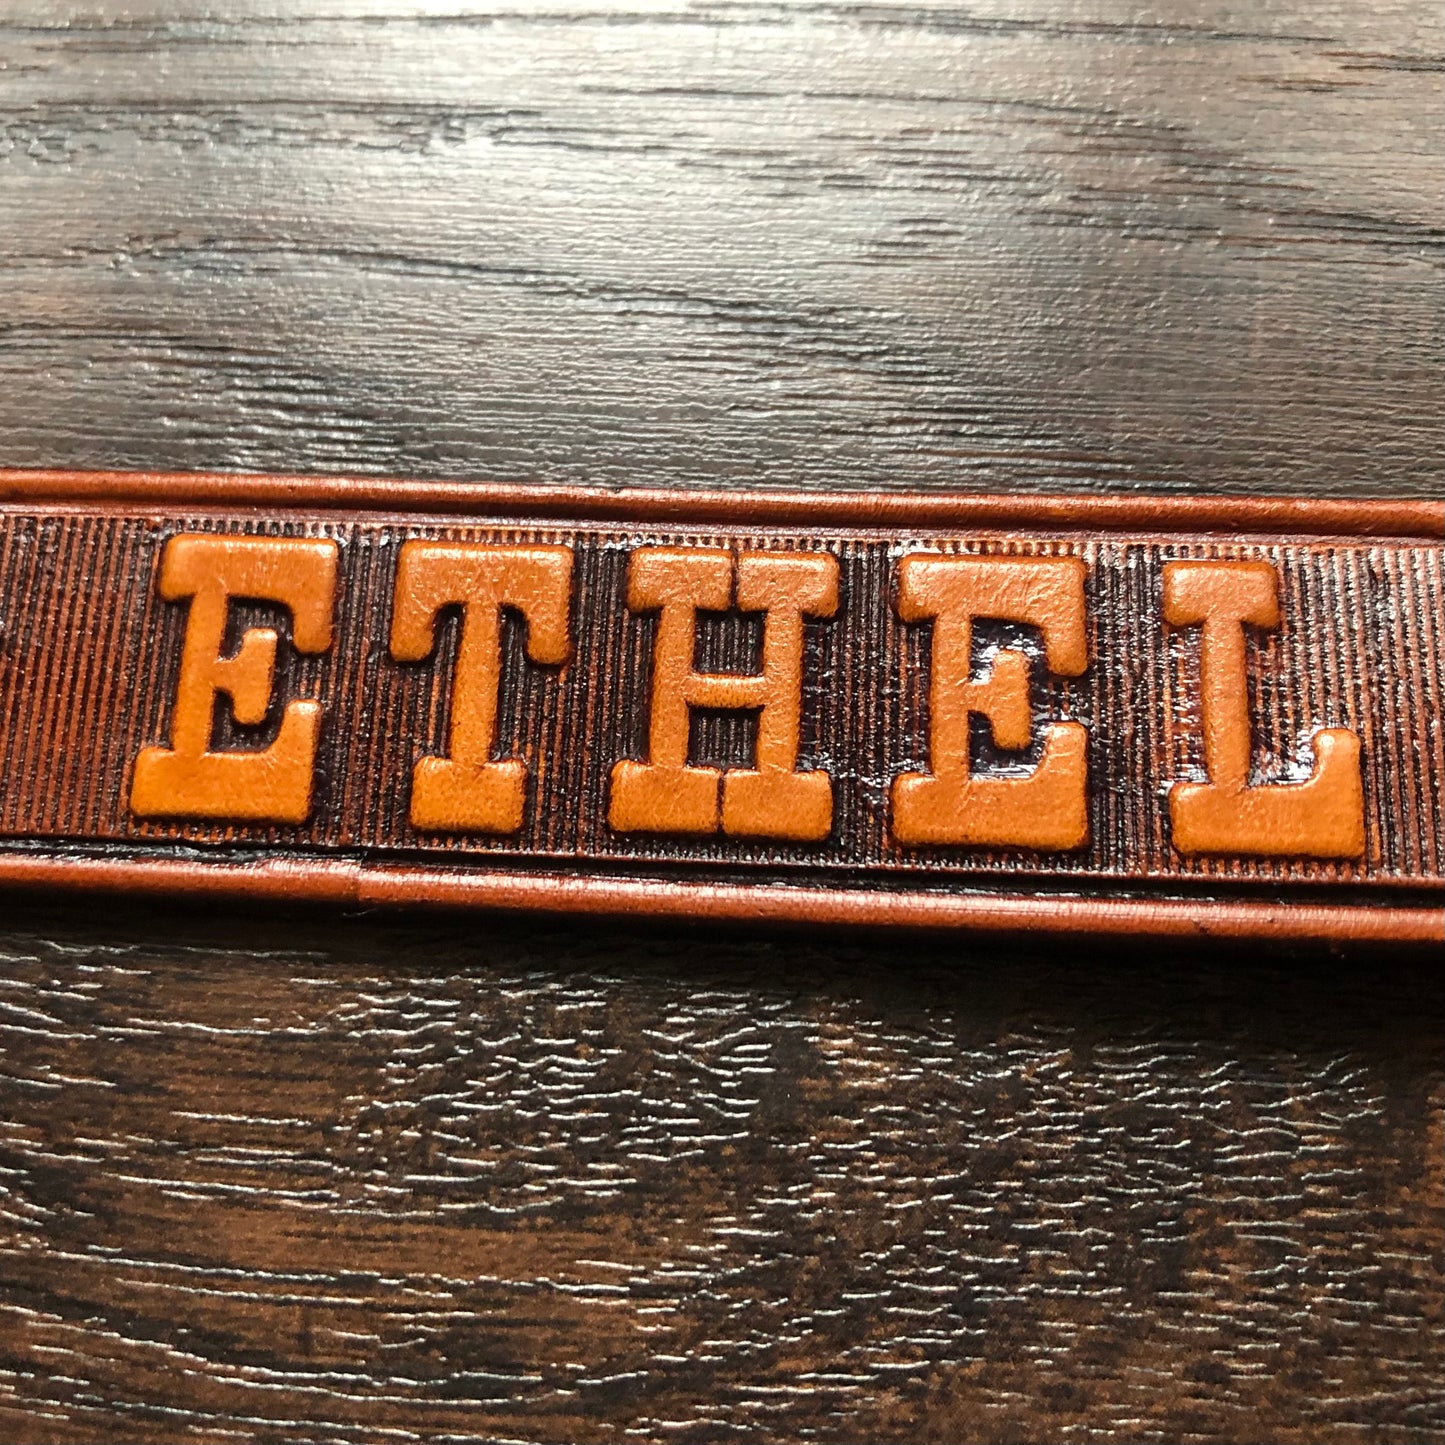 Vintage Western Tooled Leather Belt with “ETHEL” Acorns and Leaves | Made in USA